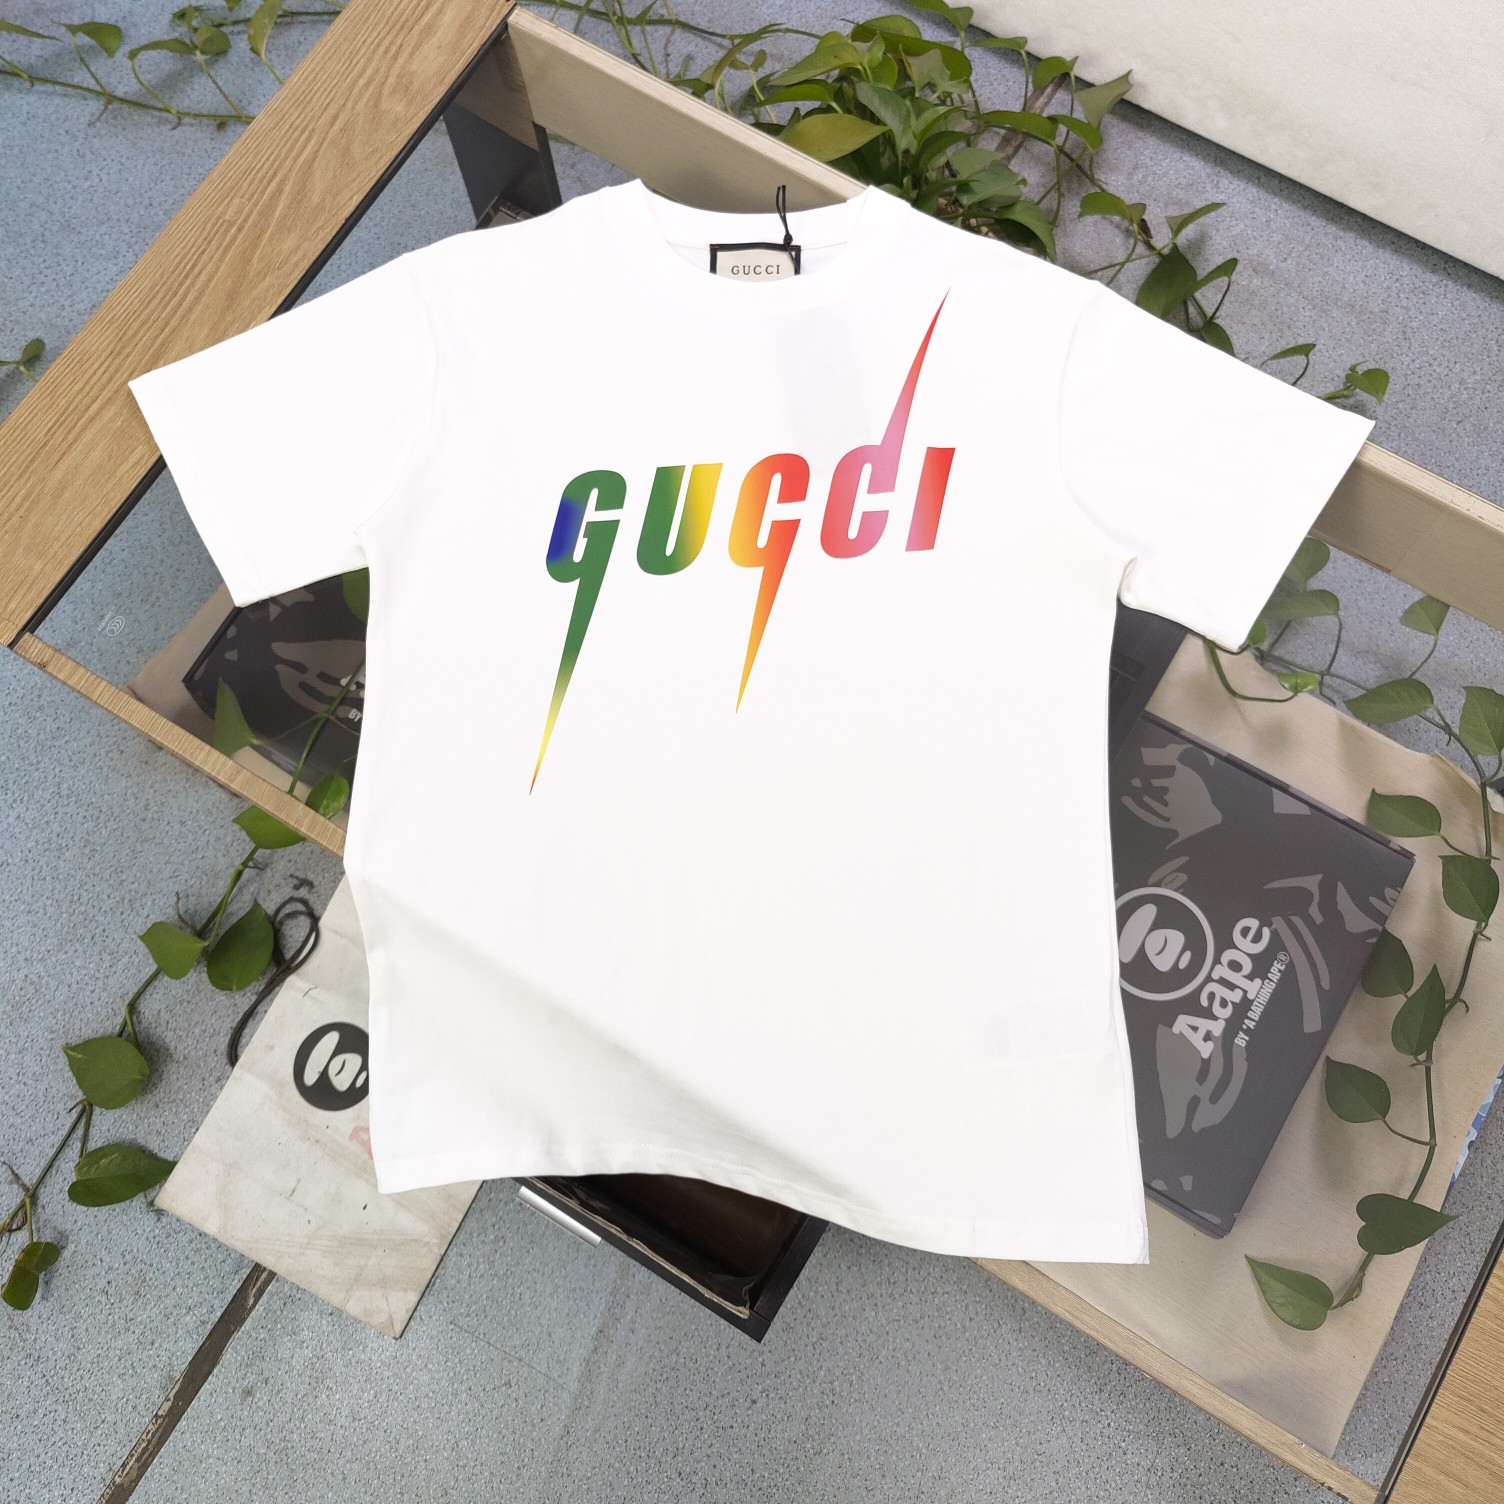 Gucci Clothing T-Shirt Black White Printing Unisex Cotton Spring/Summer Collection Short Sleeve XD99087